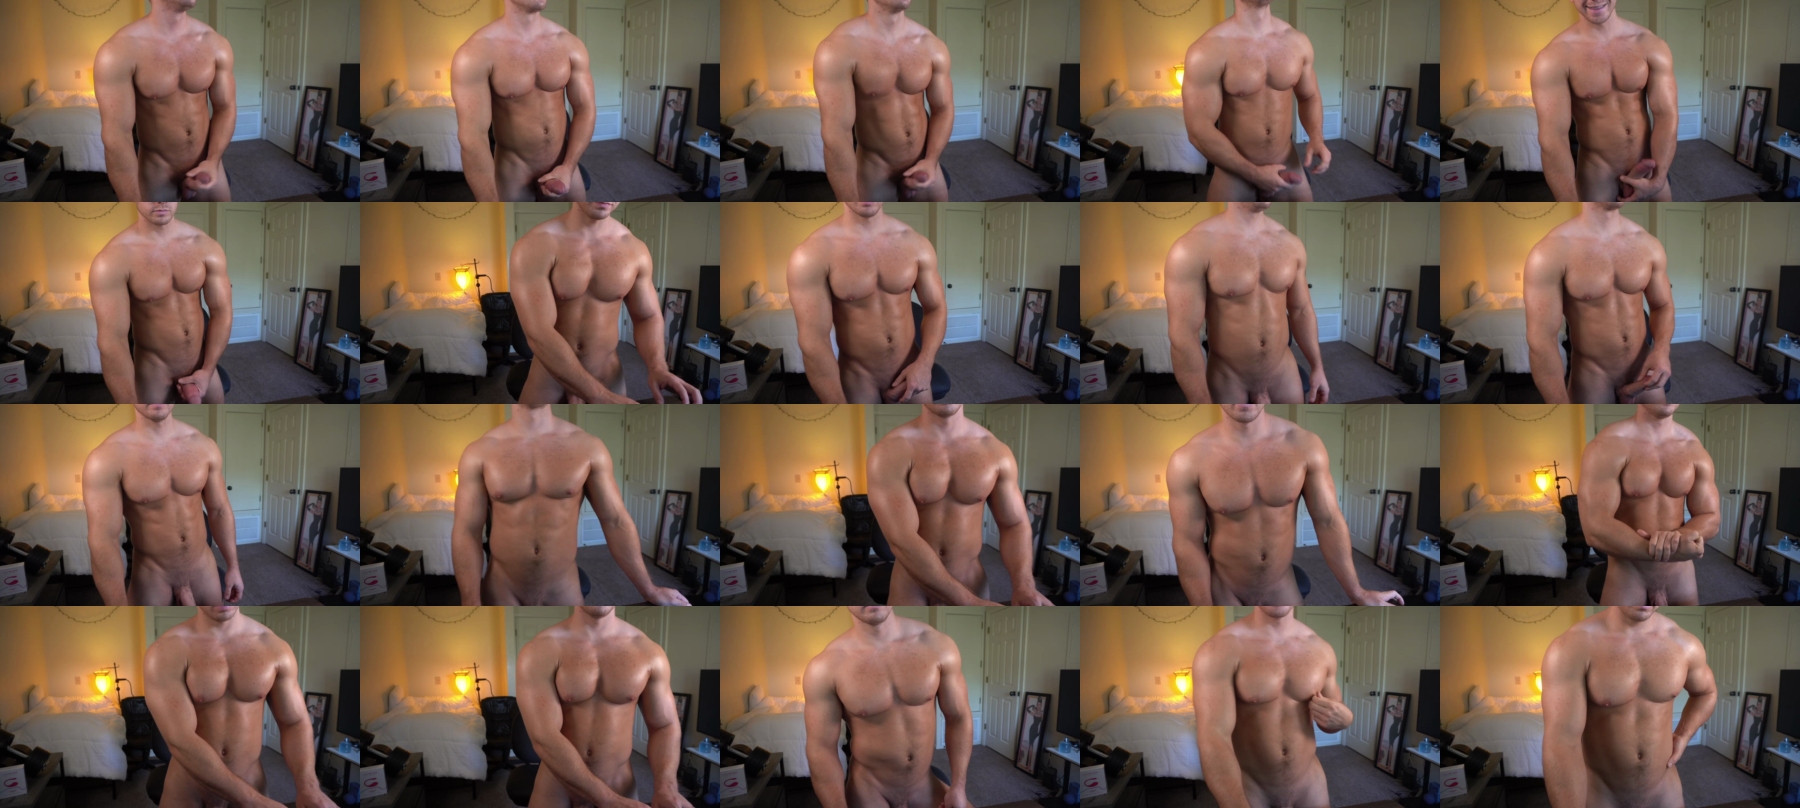 Hotmuscles6t9  03-06-2021 Male Topless